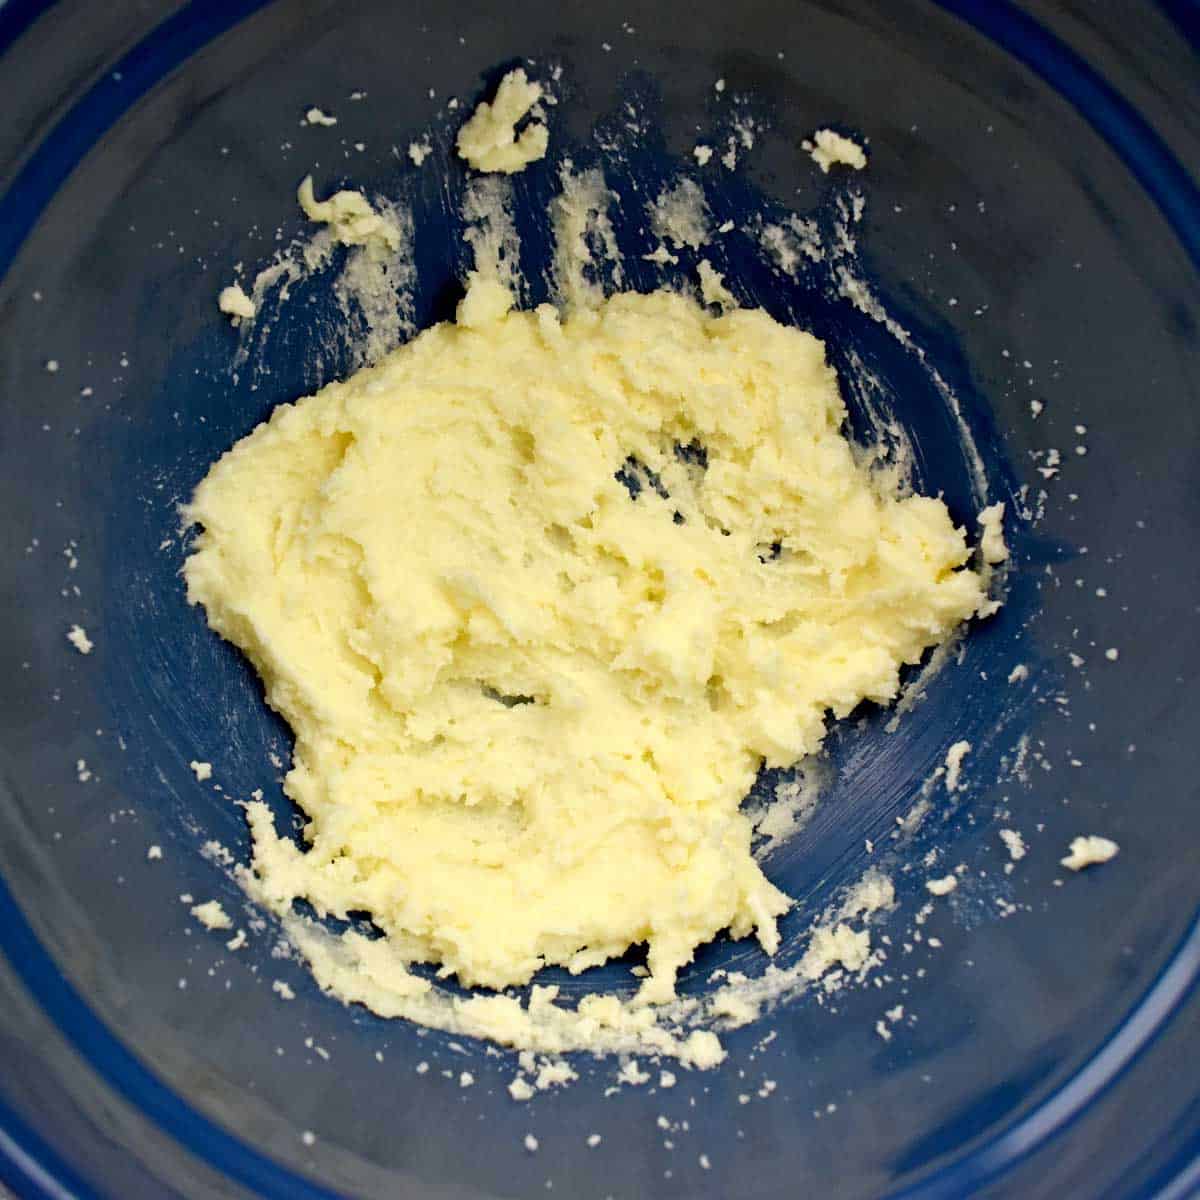 Butter and sugar creamed together in blue mixing bowl.